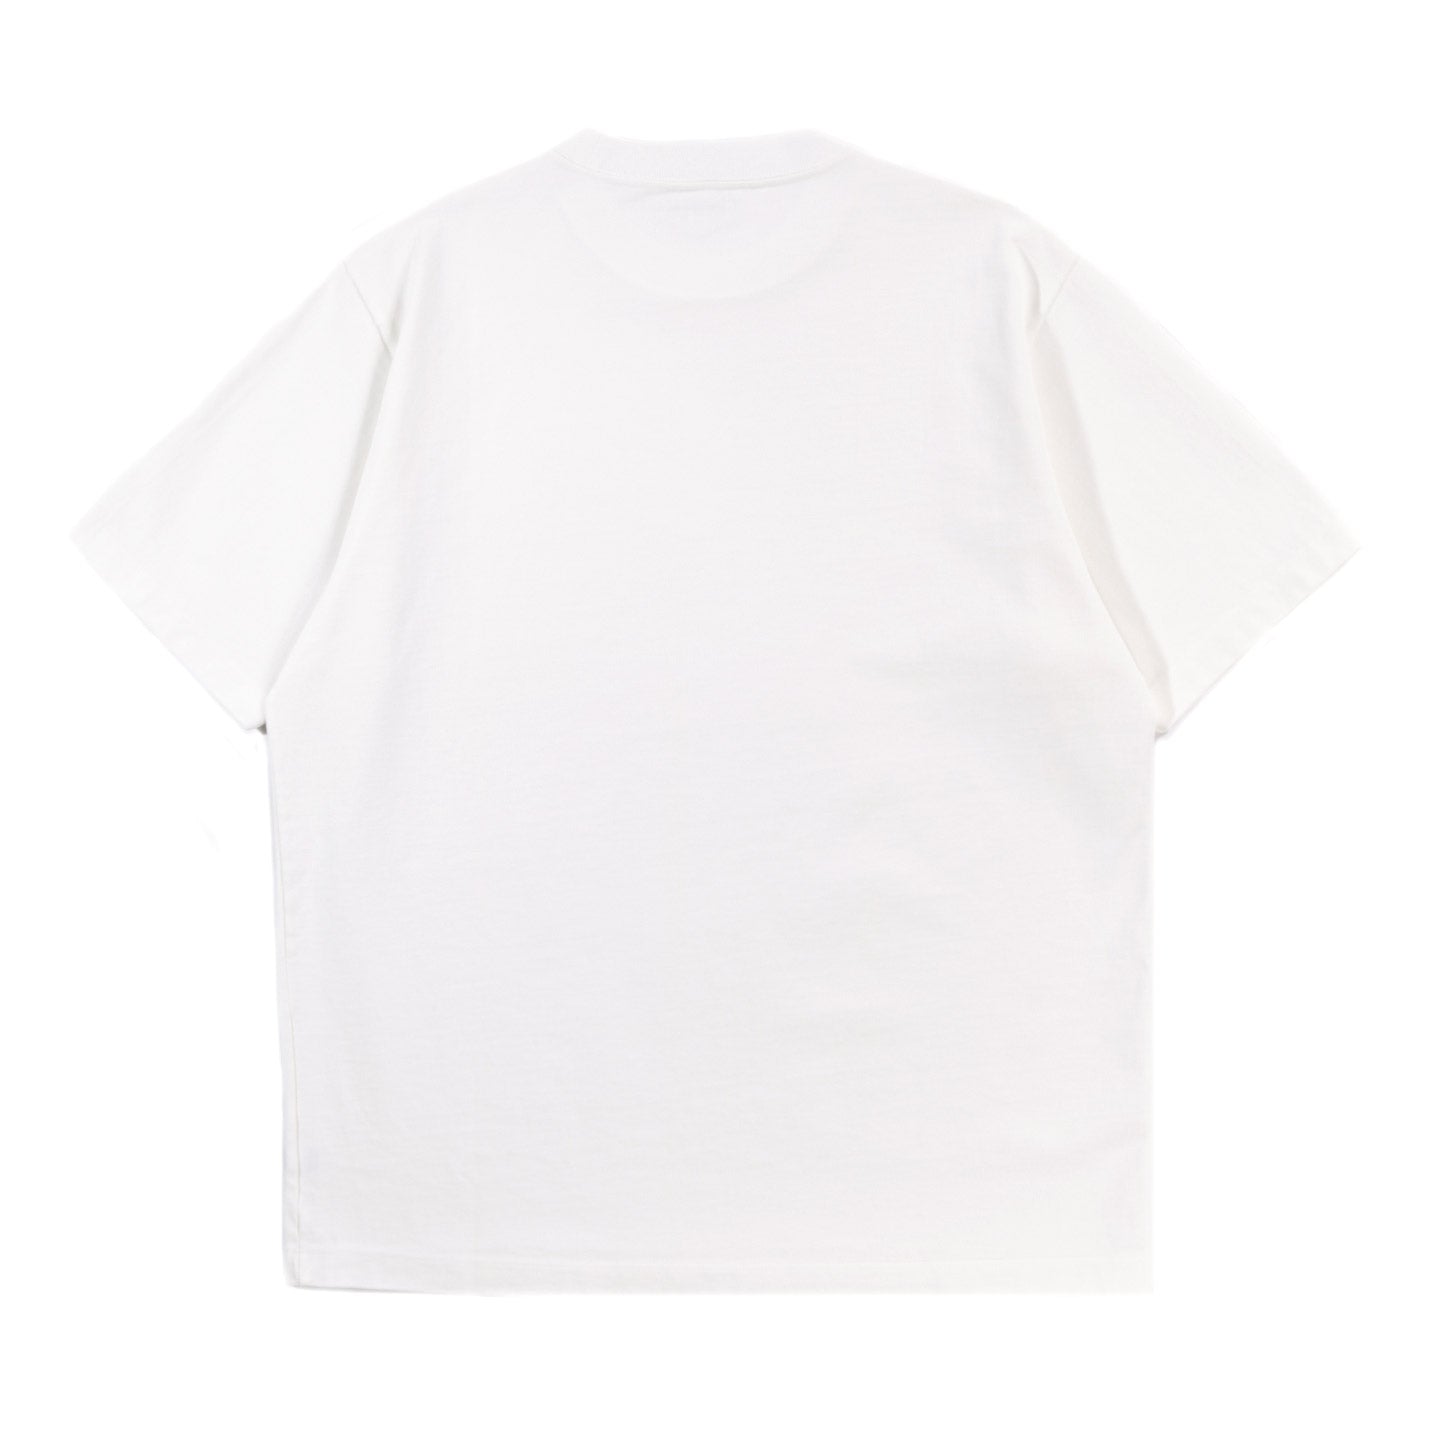 LADY WHITE CO. RUGBY T-SHIRT WHITE